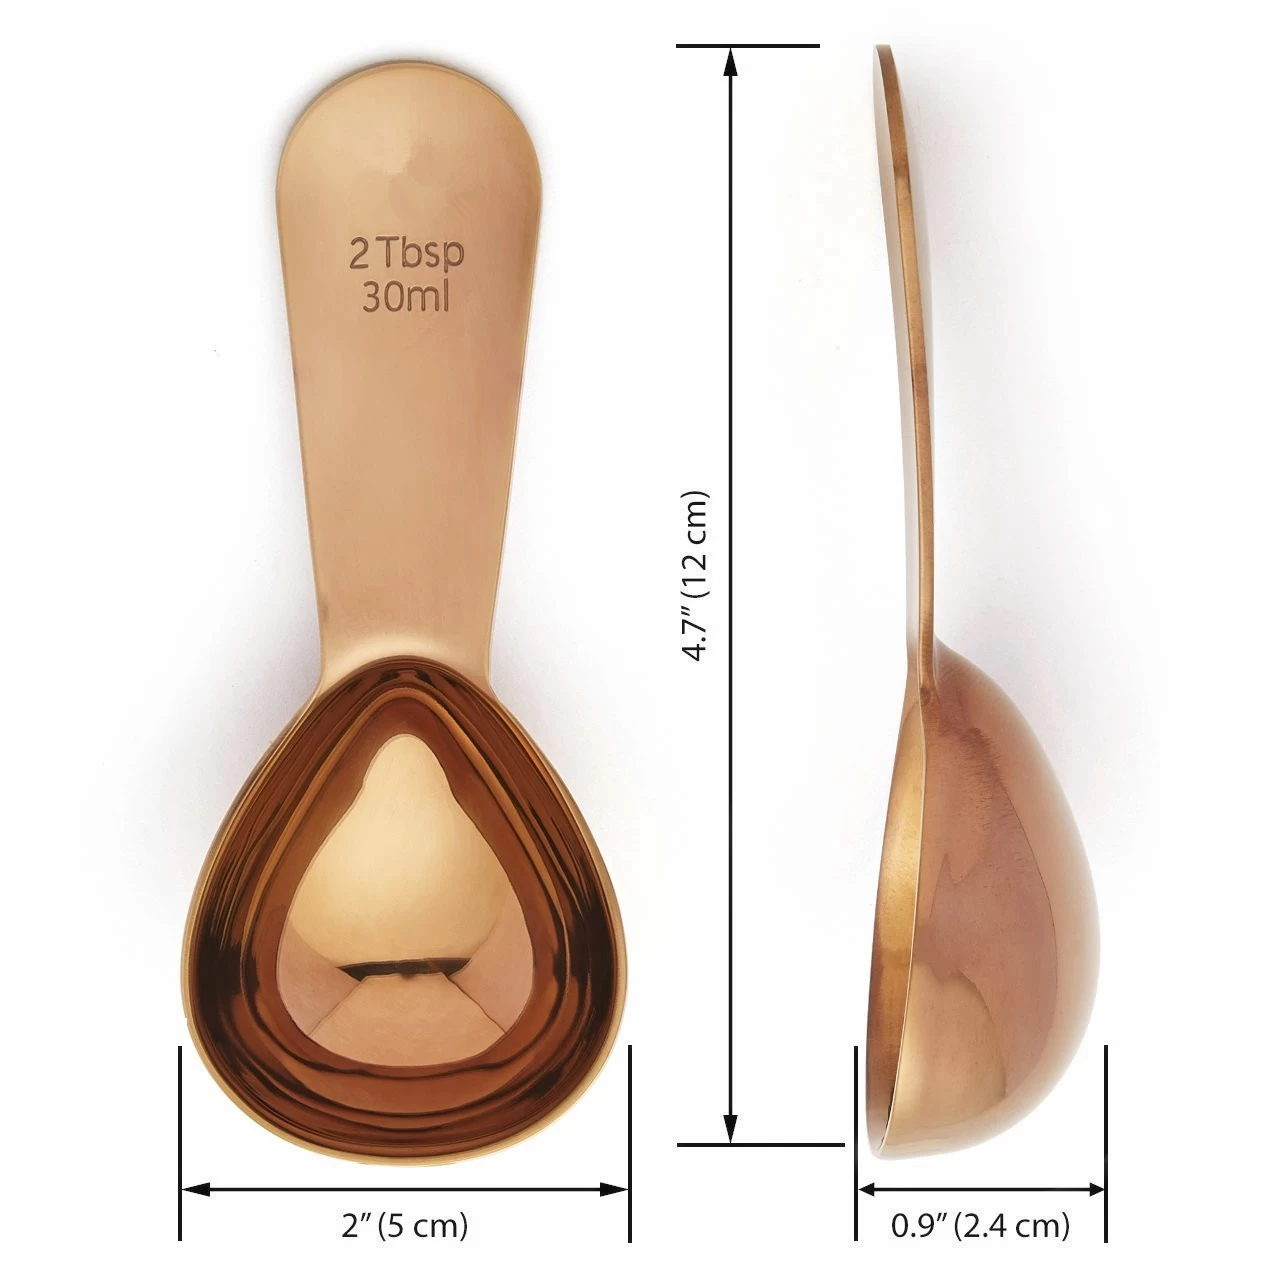 Stainless steel coffee spoon manufacturer china, China Measuring Spoon factory, Stainless Steel Measuring Spoon factory